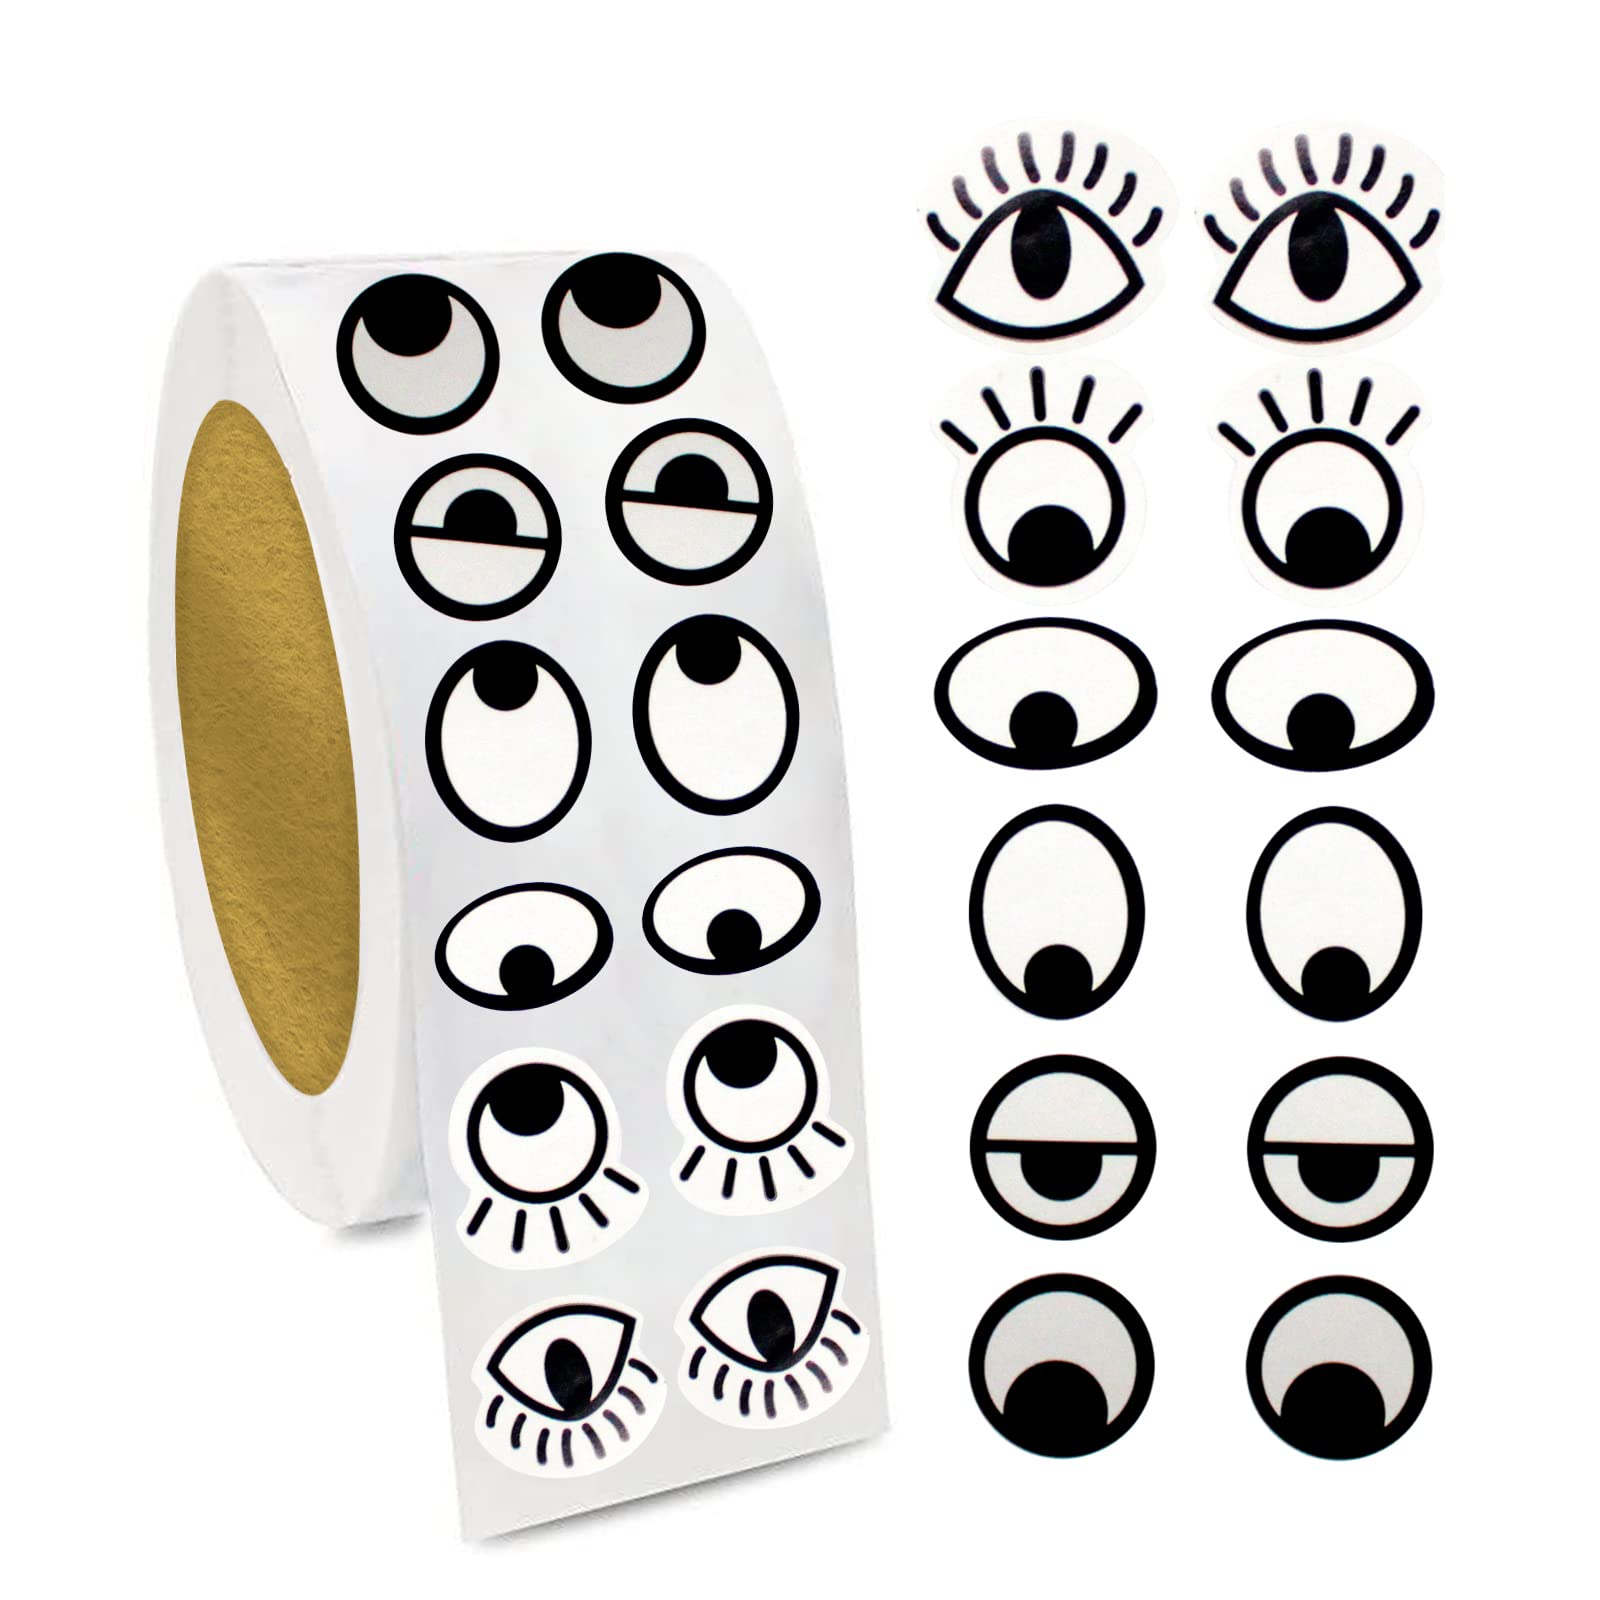 BLMHTWO 2000 Pieces Eye Stickers Large Googly Eyes Self Adhesive Stickers  Labels Black White Cartoon Wiggle